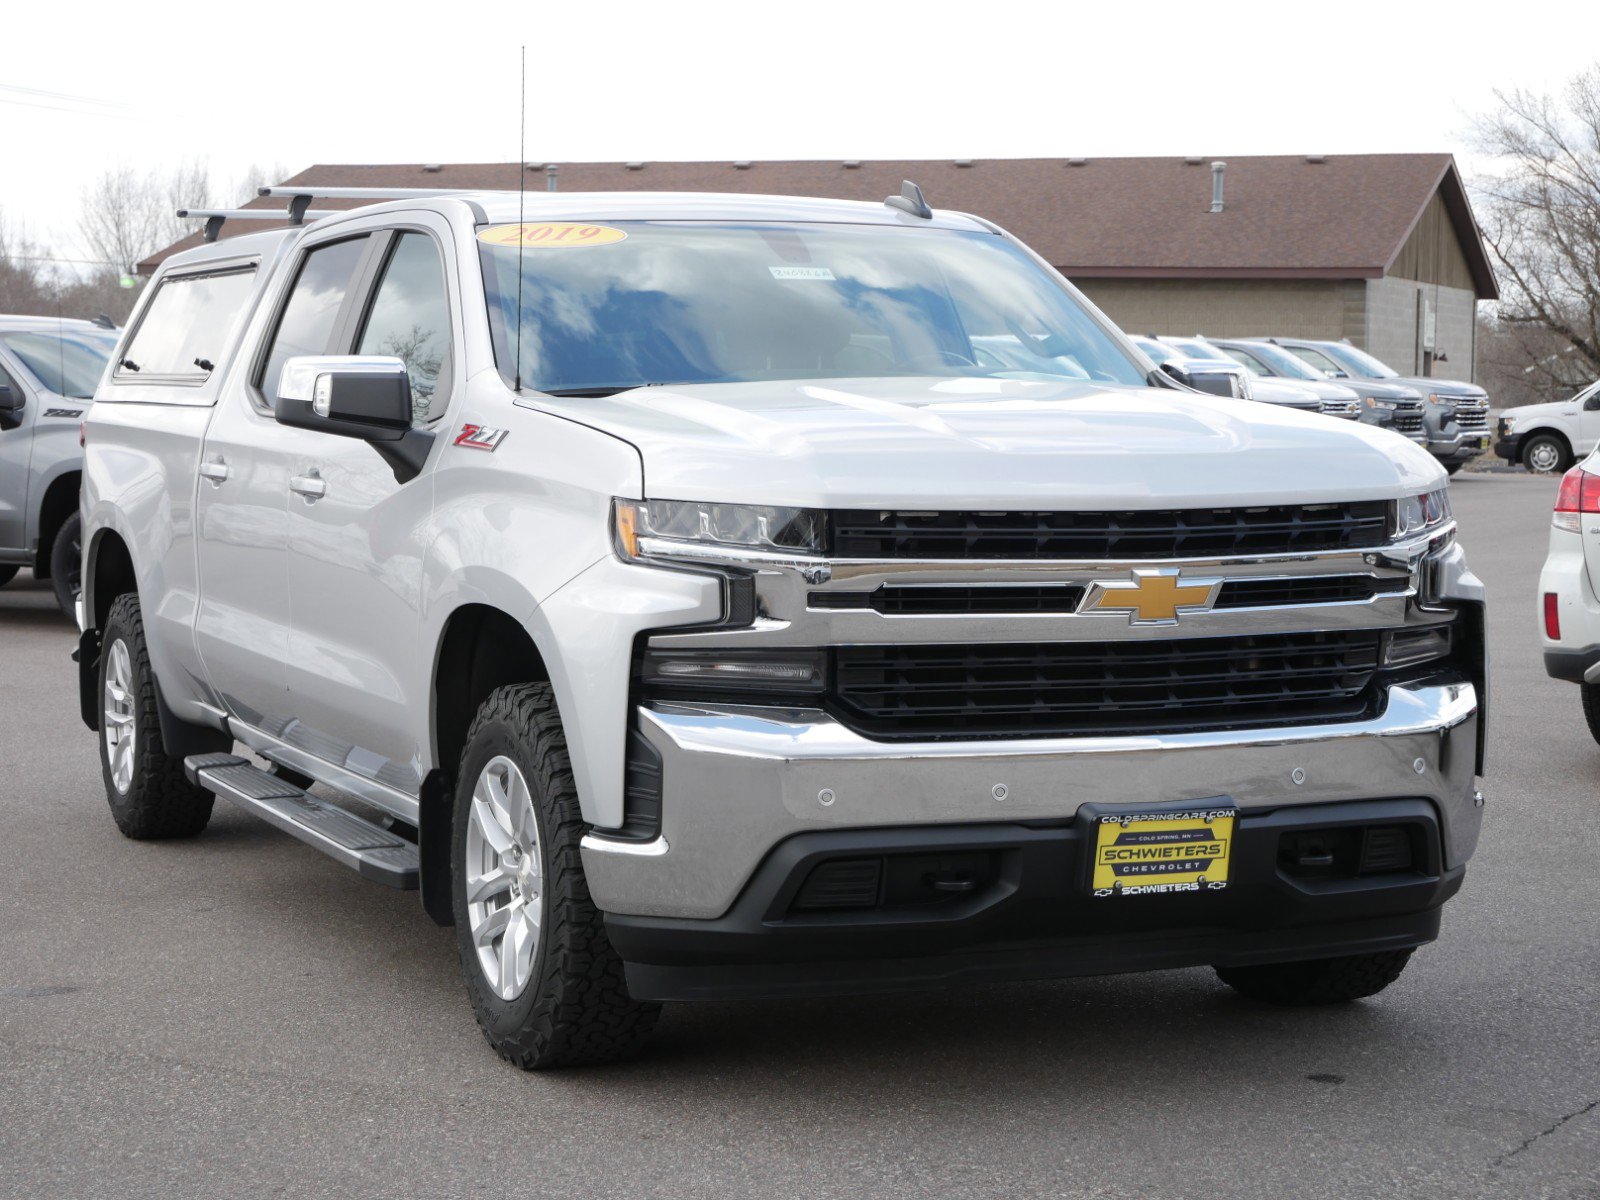 Used 2019 Chevrolet Silverado 1500 LT with VIN 3GCUYDED5KG184590 for sale in Cold Spring, Minnesota